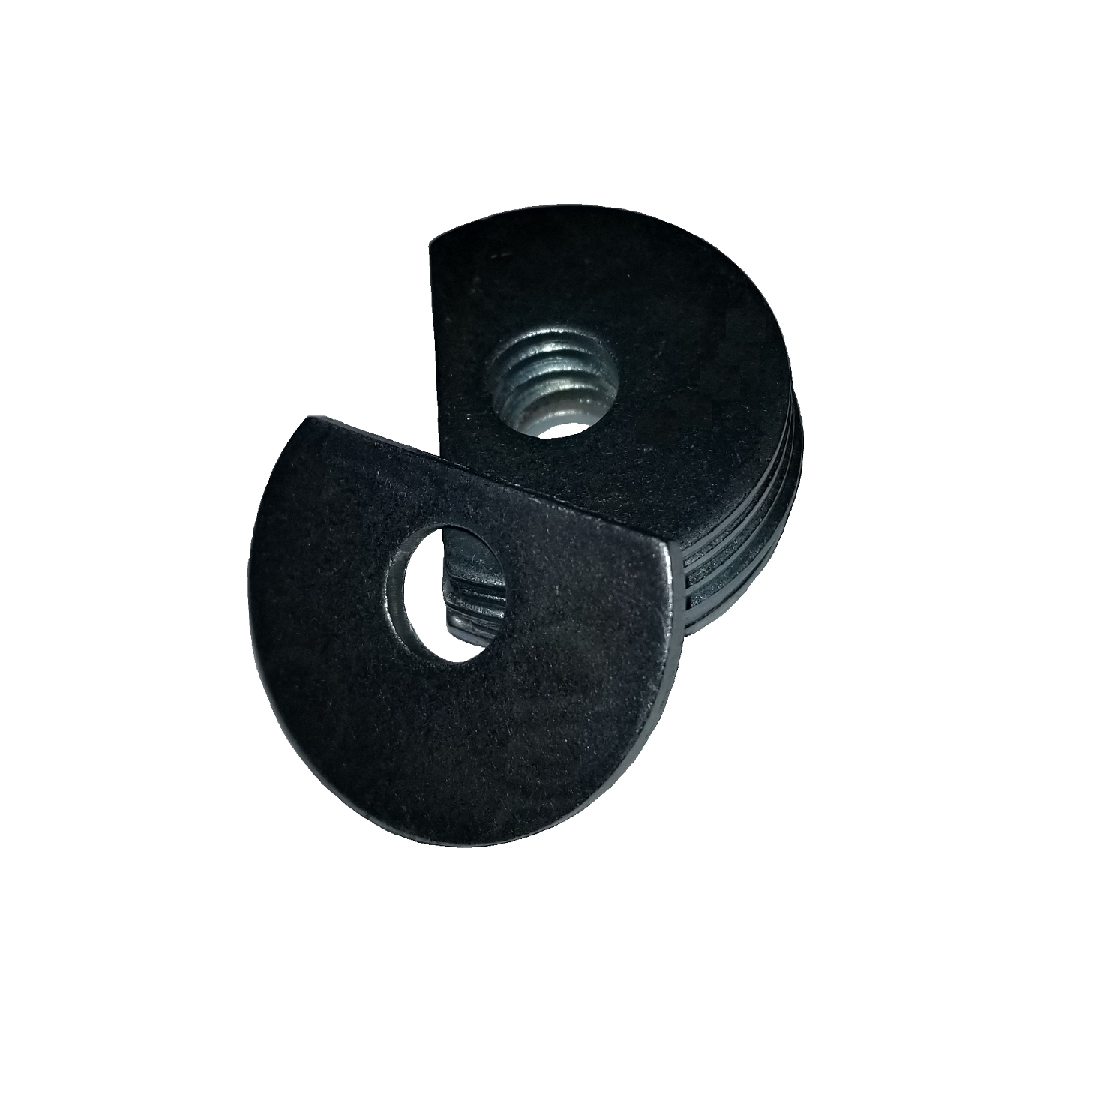 Clipped OD Washer - 0.531 ID, 2.500 OD, 0.104 Thick, Low Carbon Steel - Soft, Zinc & Clear